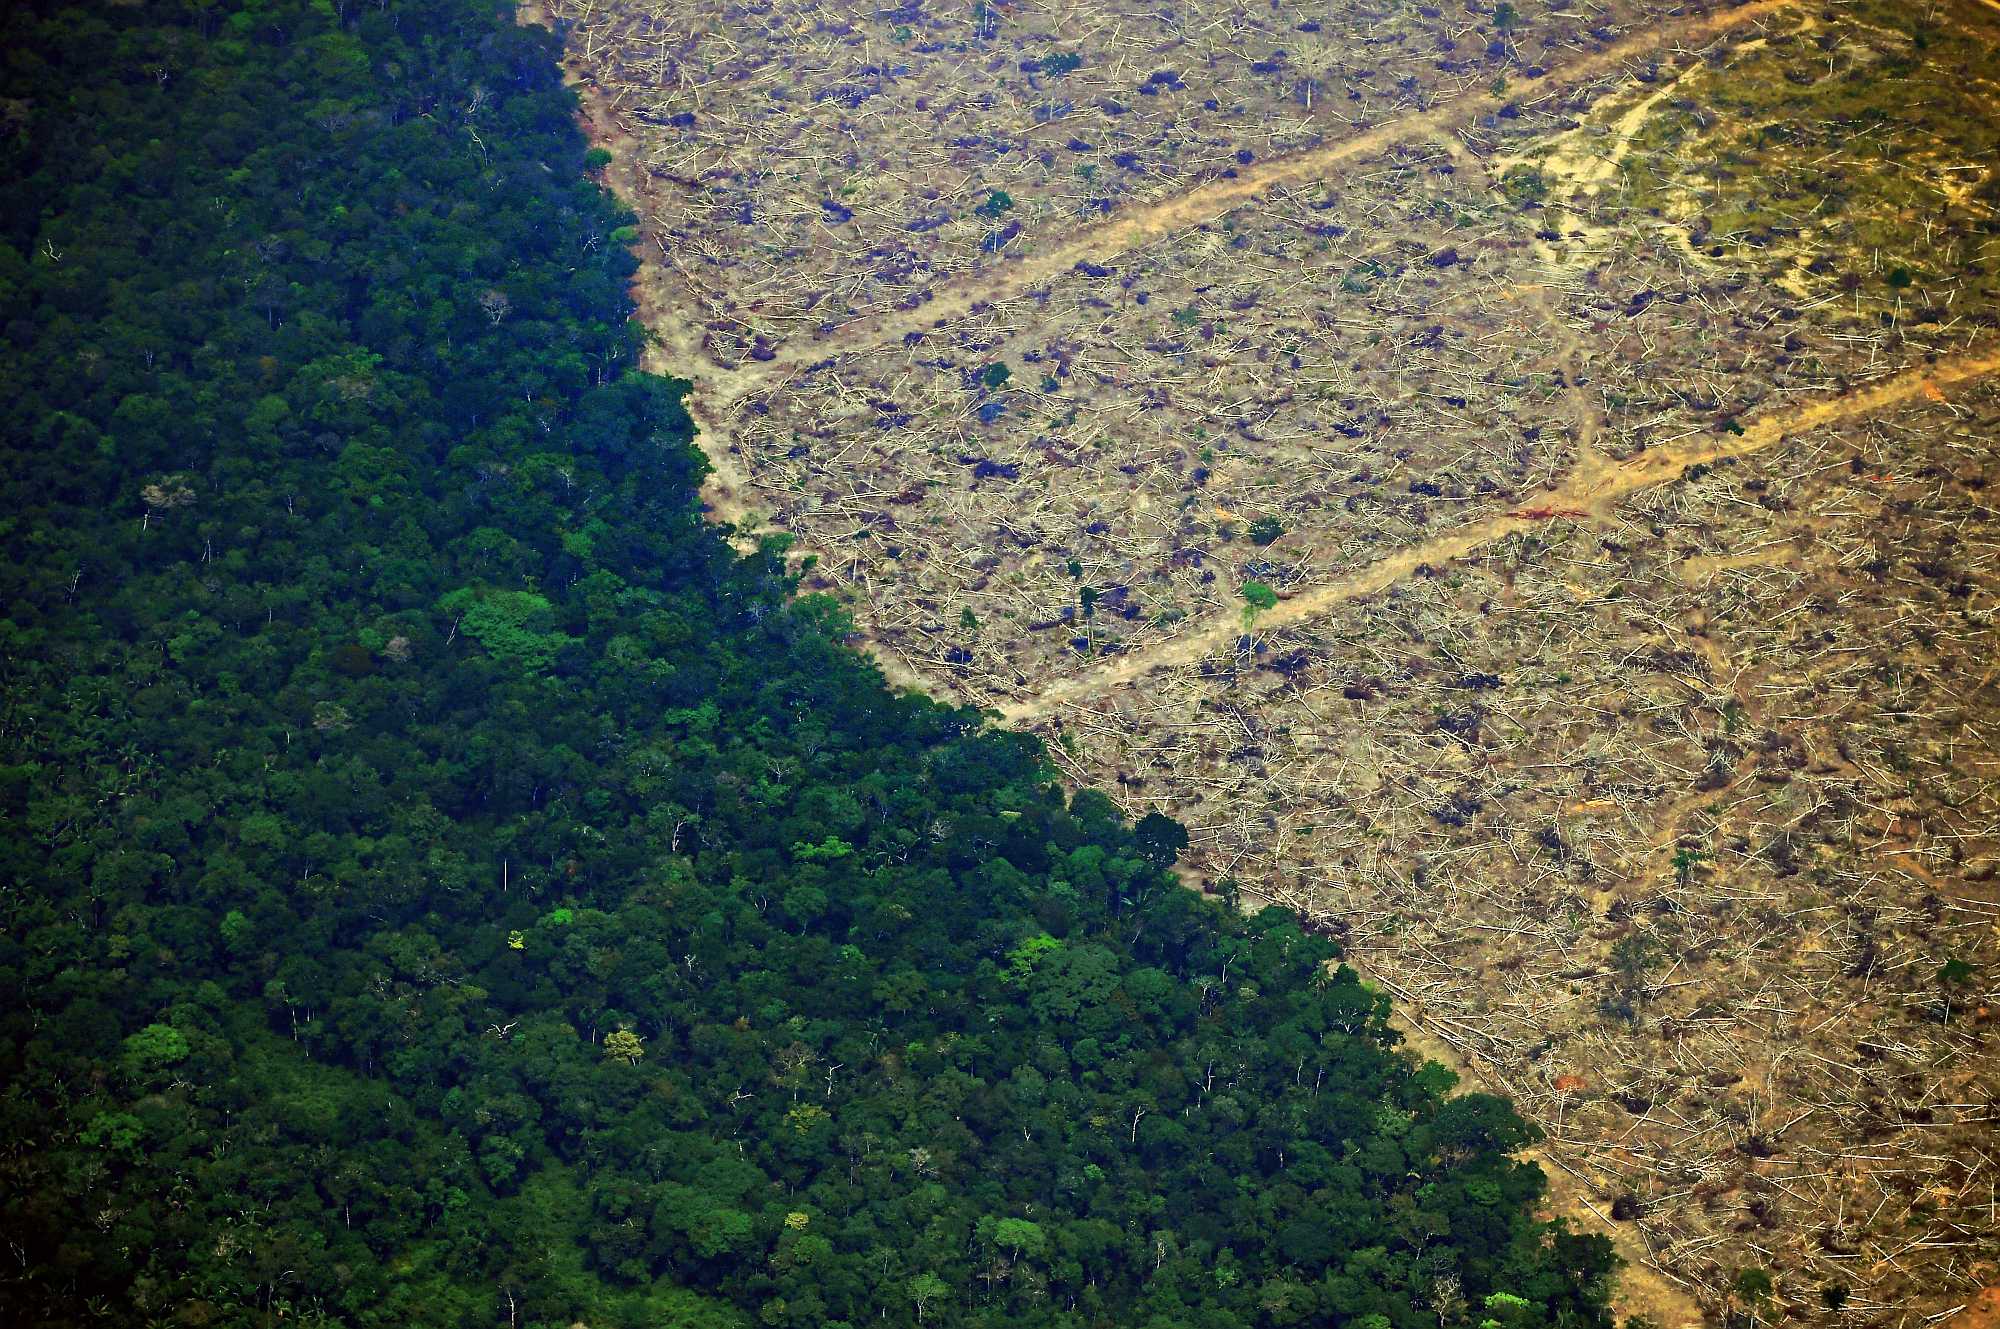 A deforested piece of land in the Amazon rainforest near Porto Velho, in the state of Rondônia. Carl De SouzaA/FP via Getty Images